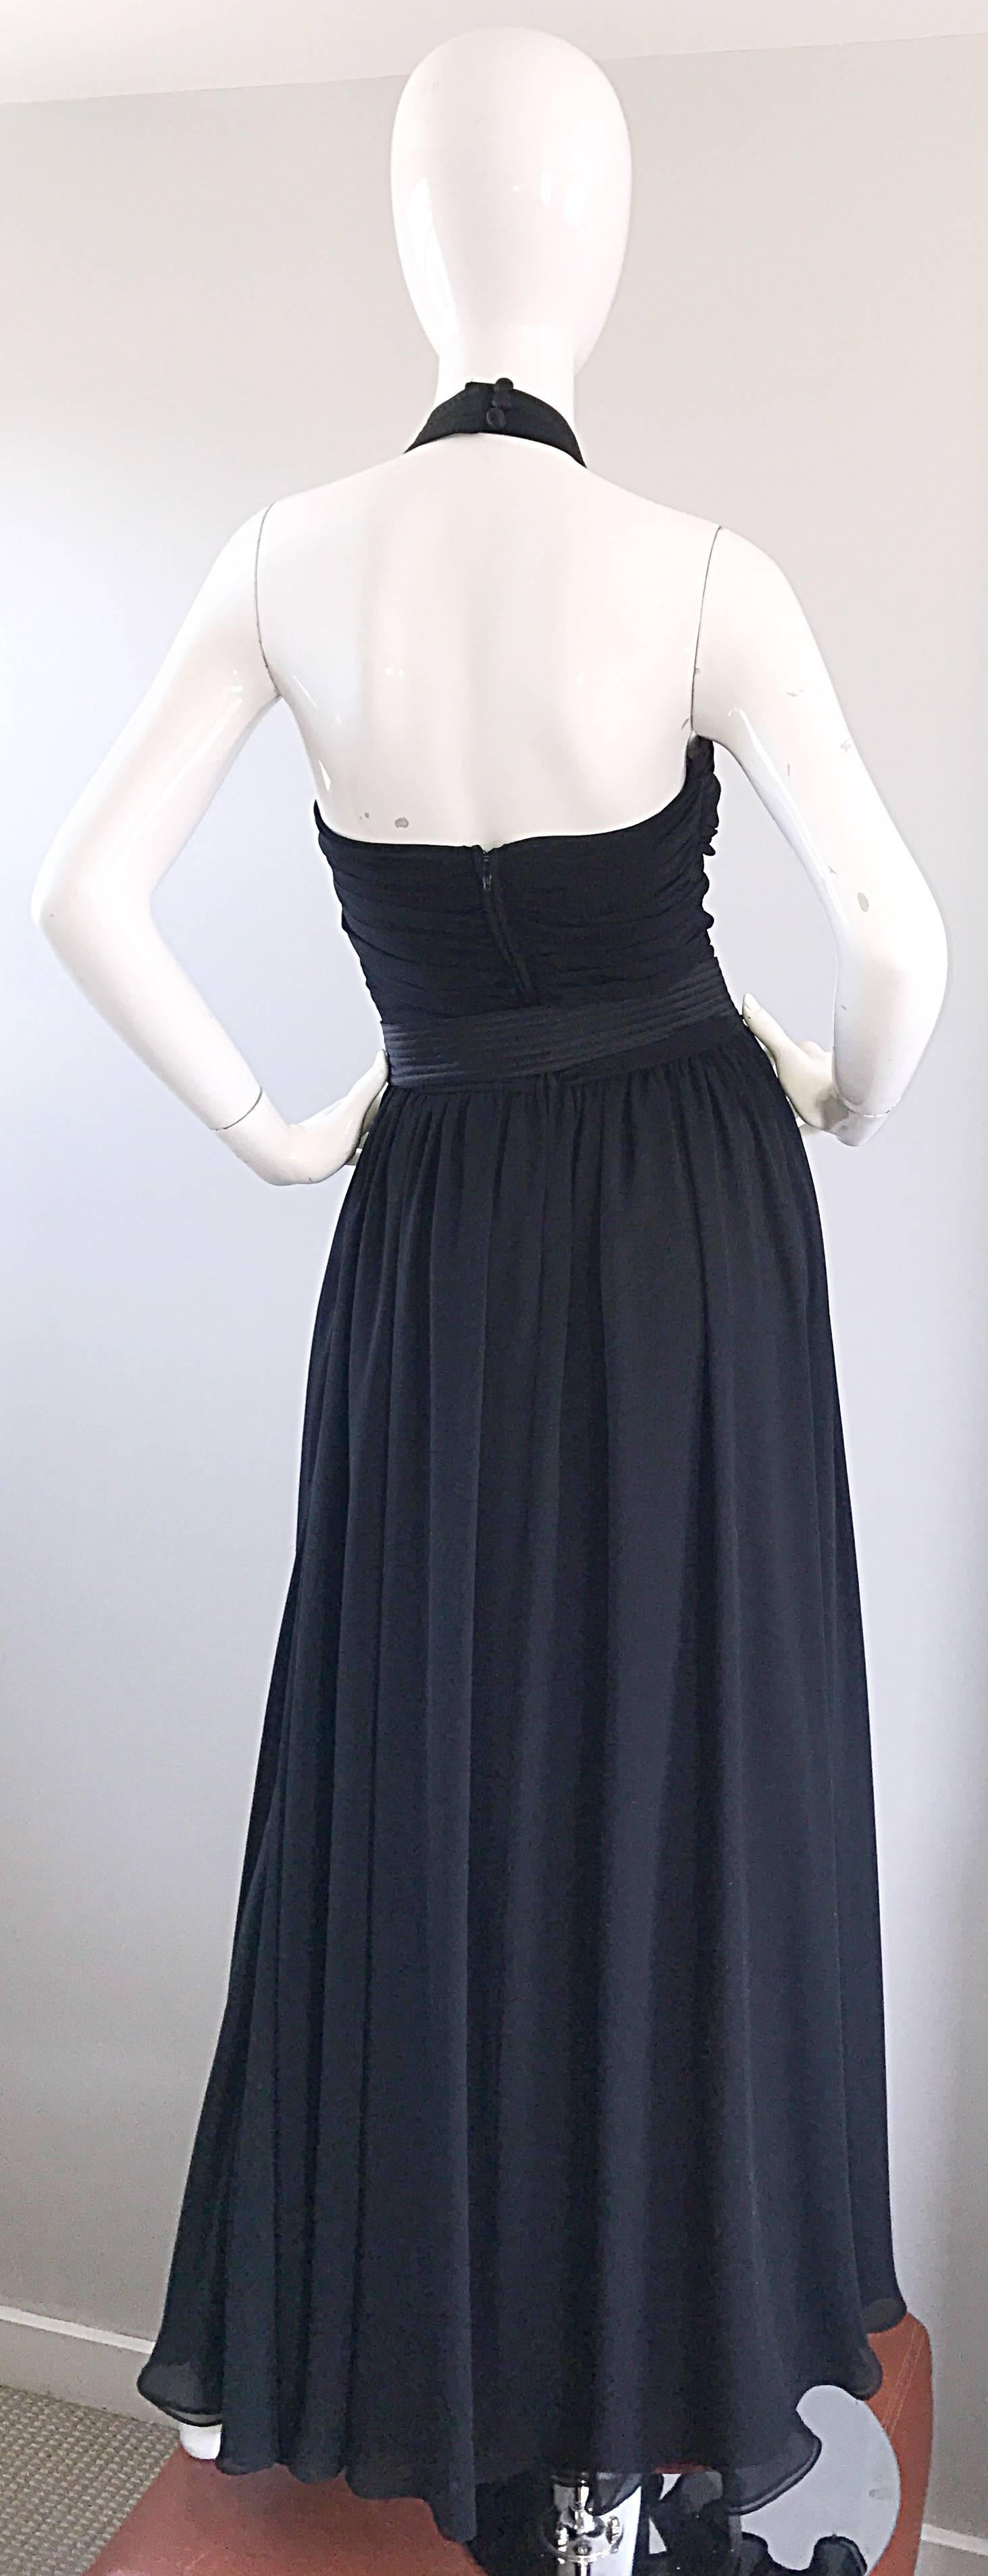 1970s Frank Usher Black Chiffon Cut - Out Belted 70s Vintage Evening Gown Dress For Sale 1